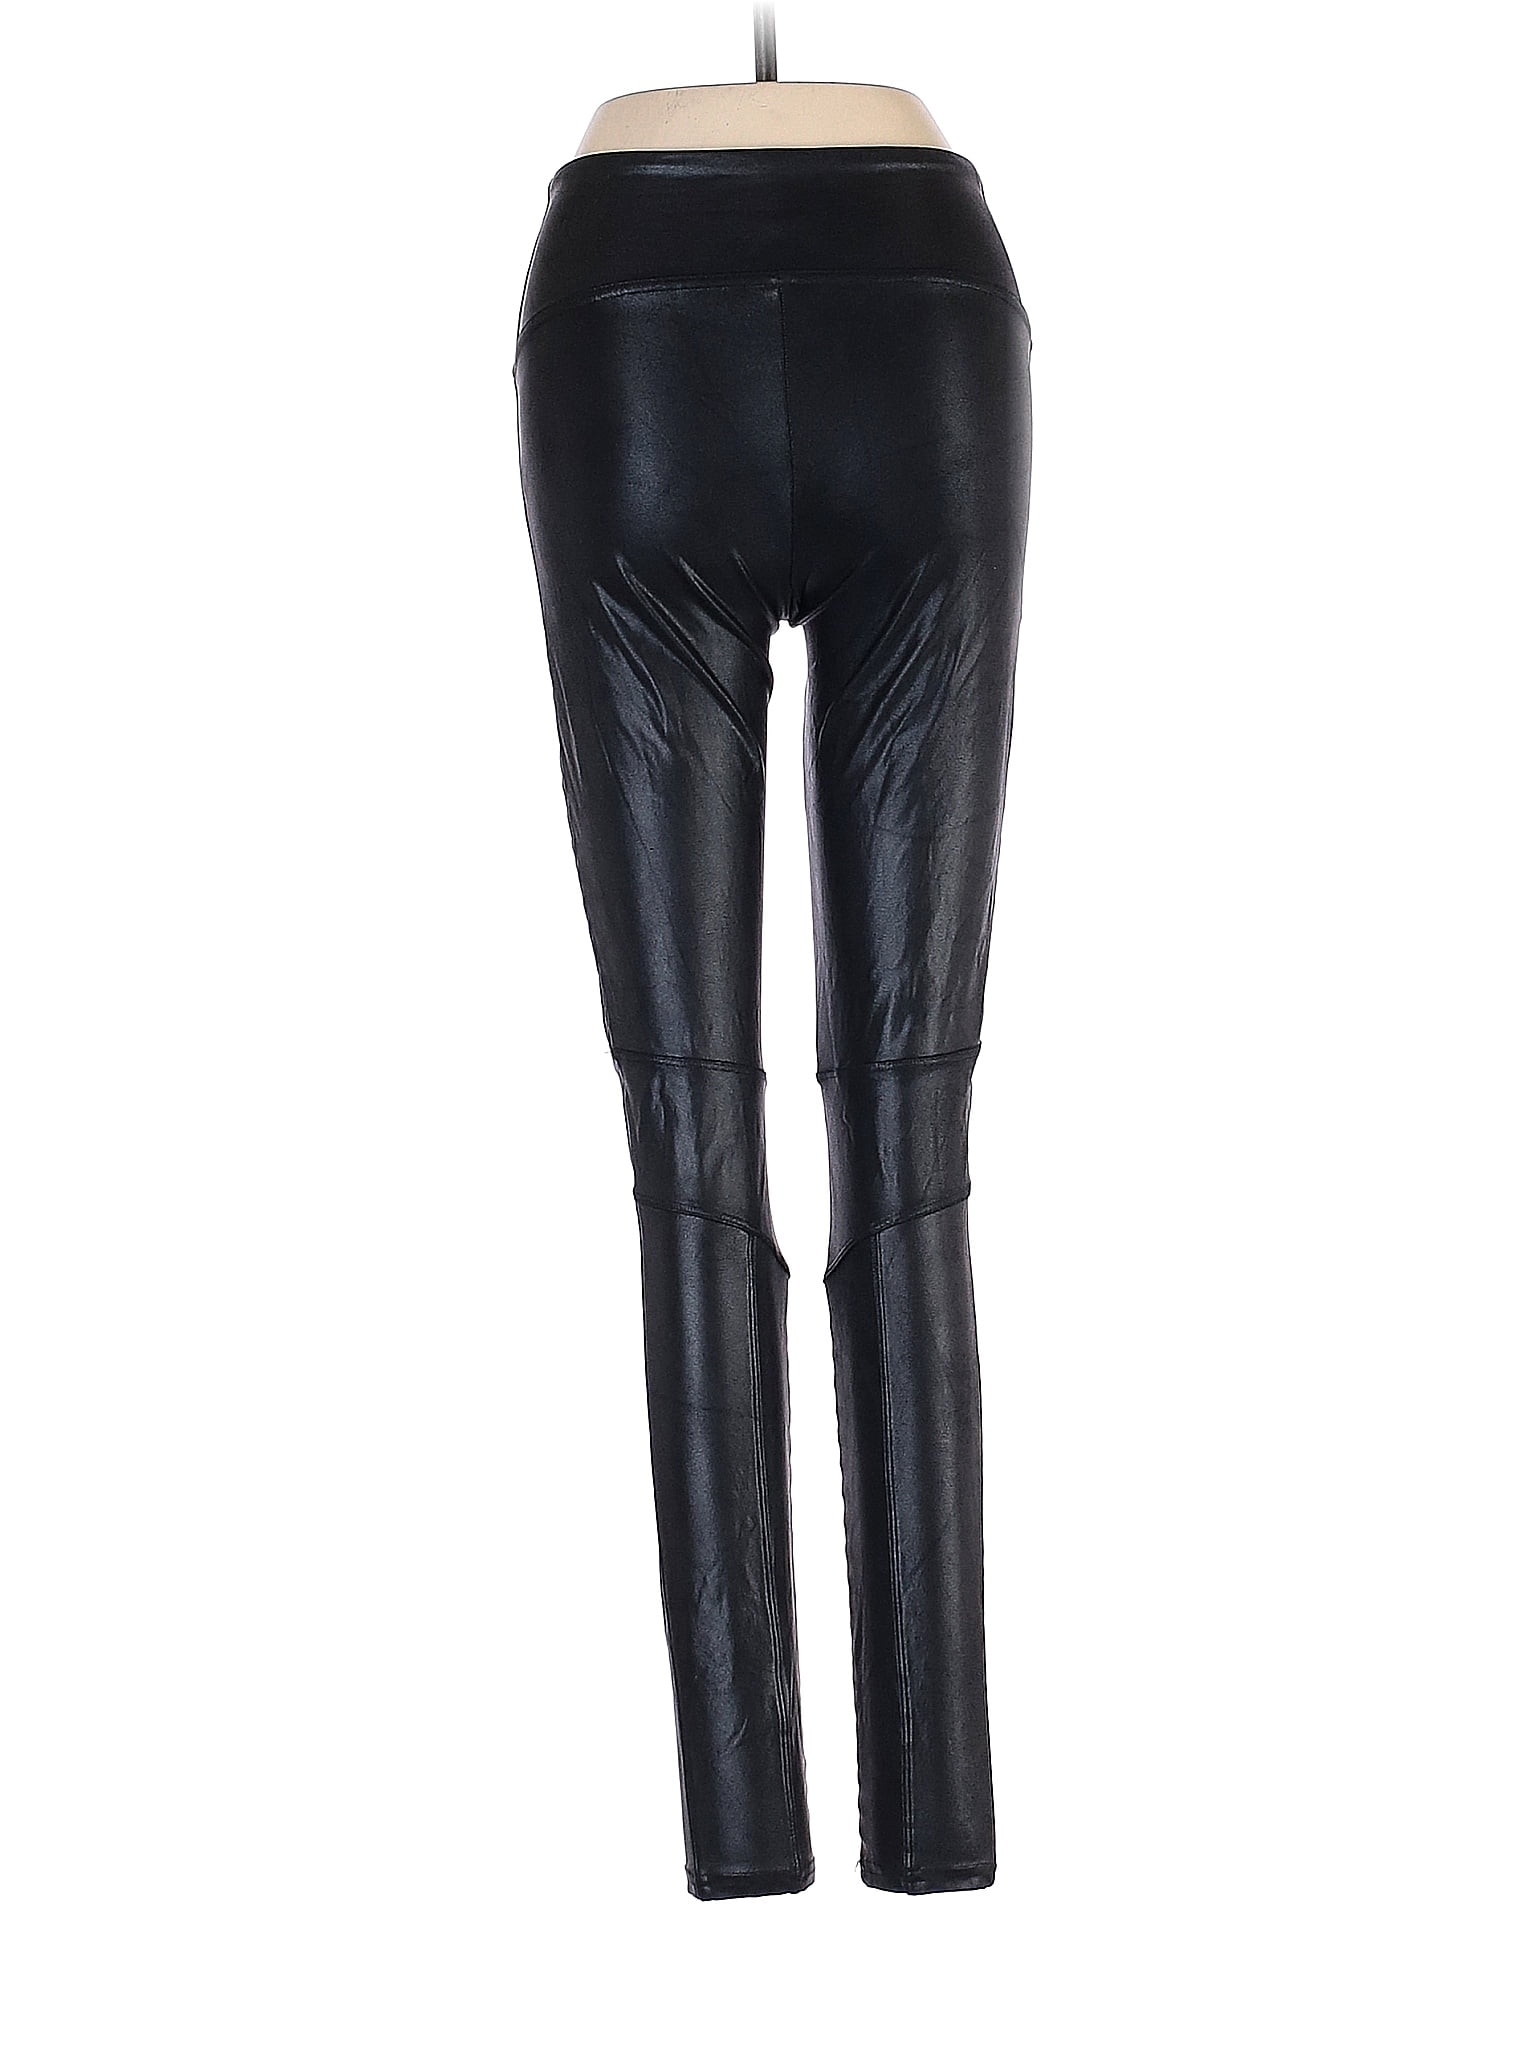 SPANX Solid Black Leggings Size S - 63% off